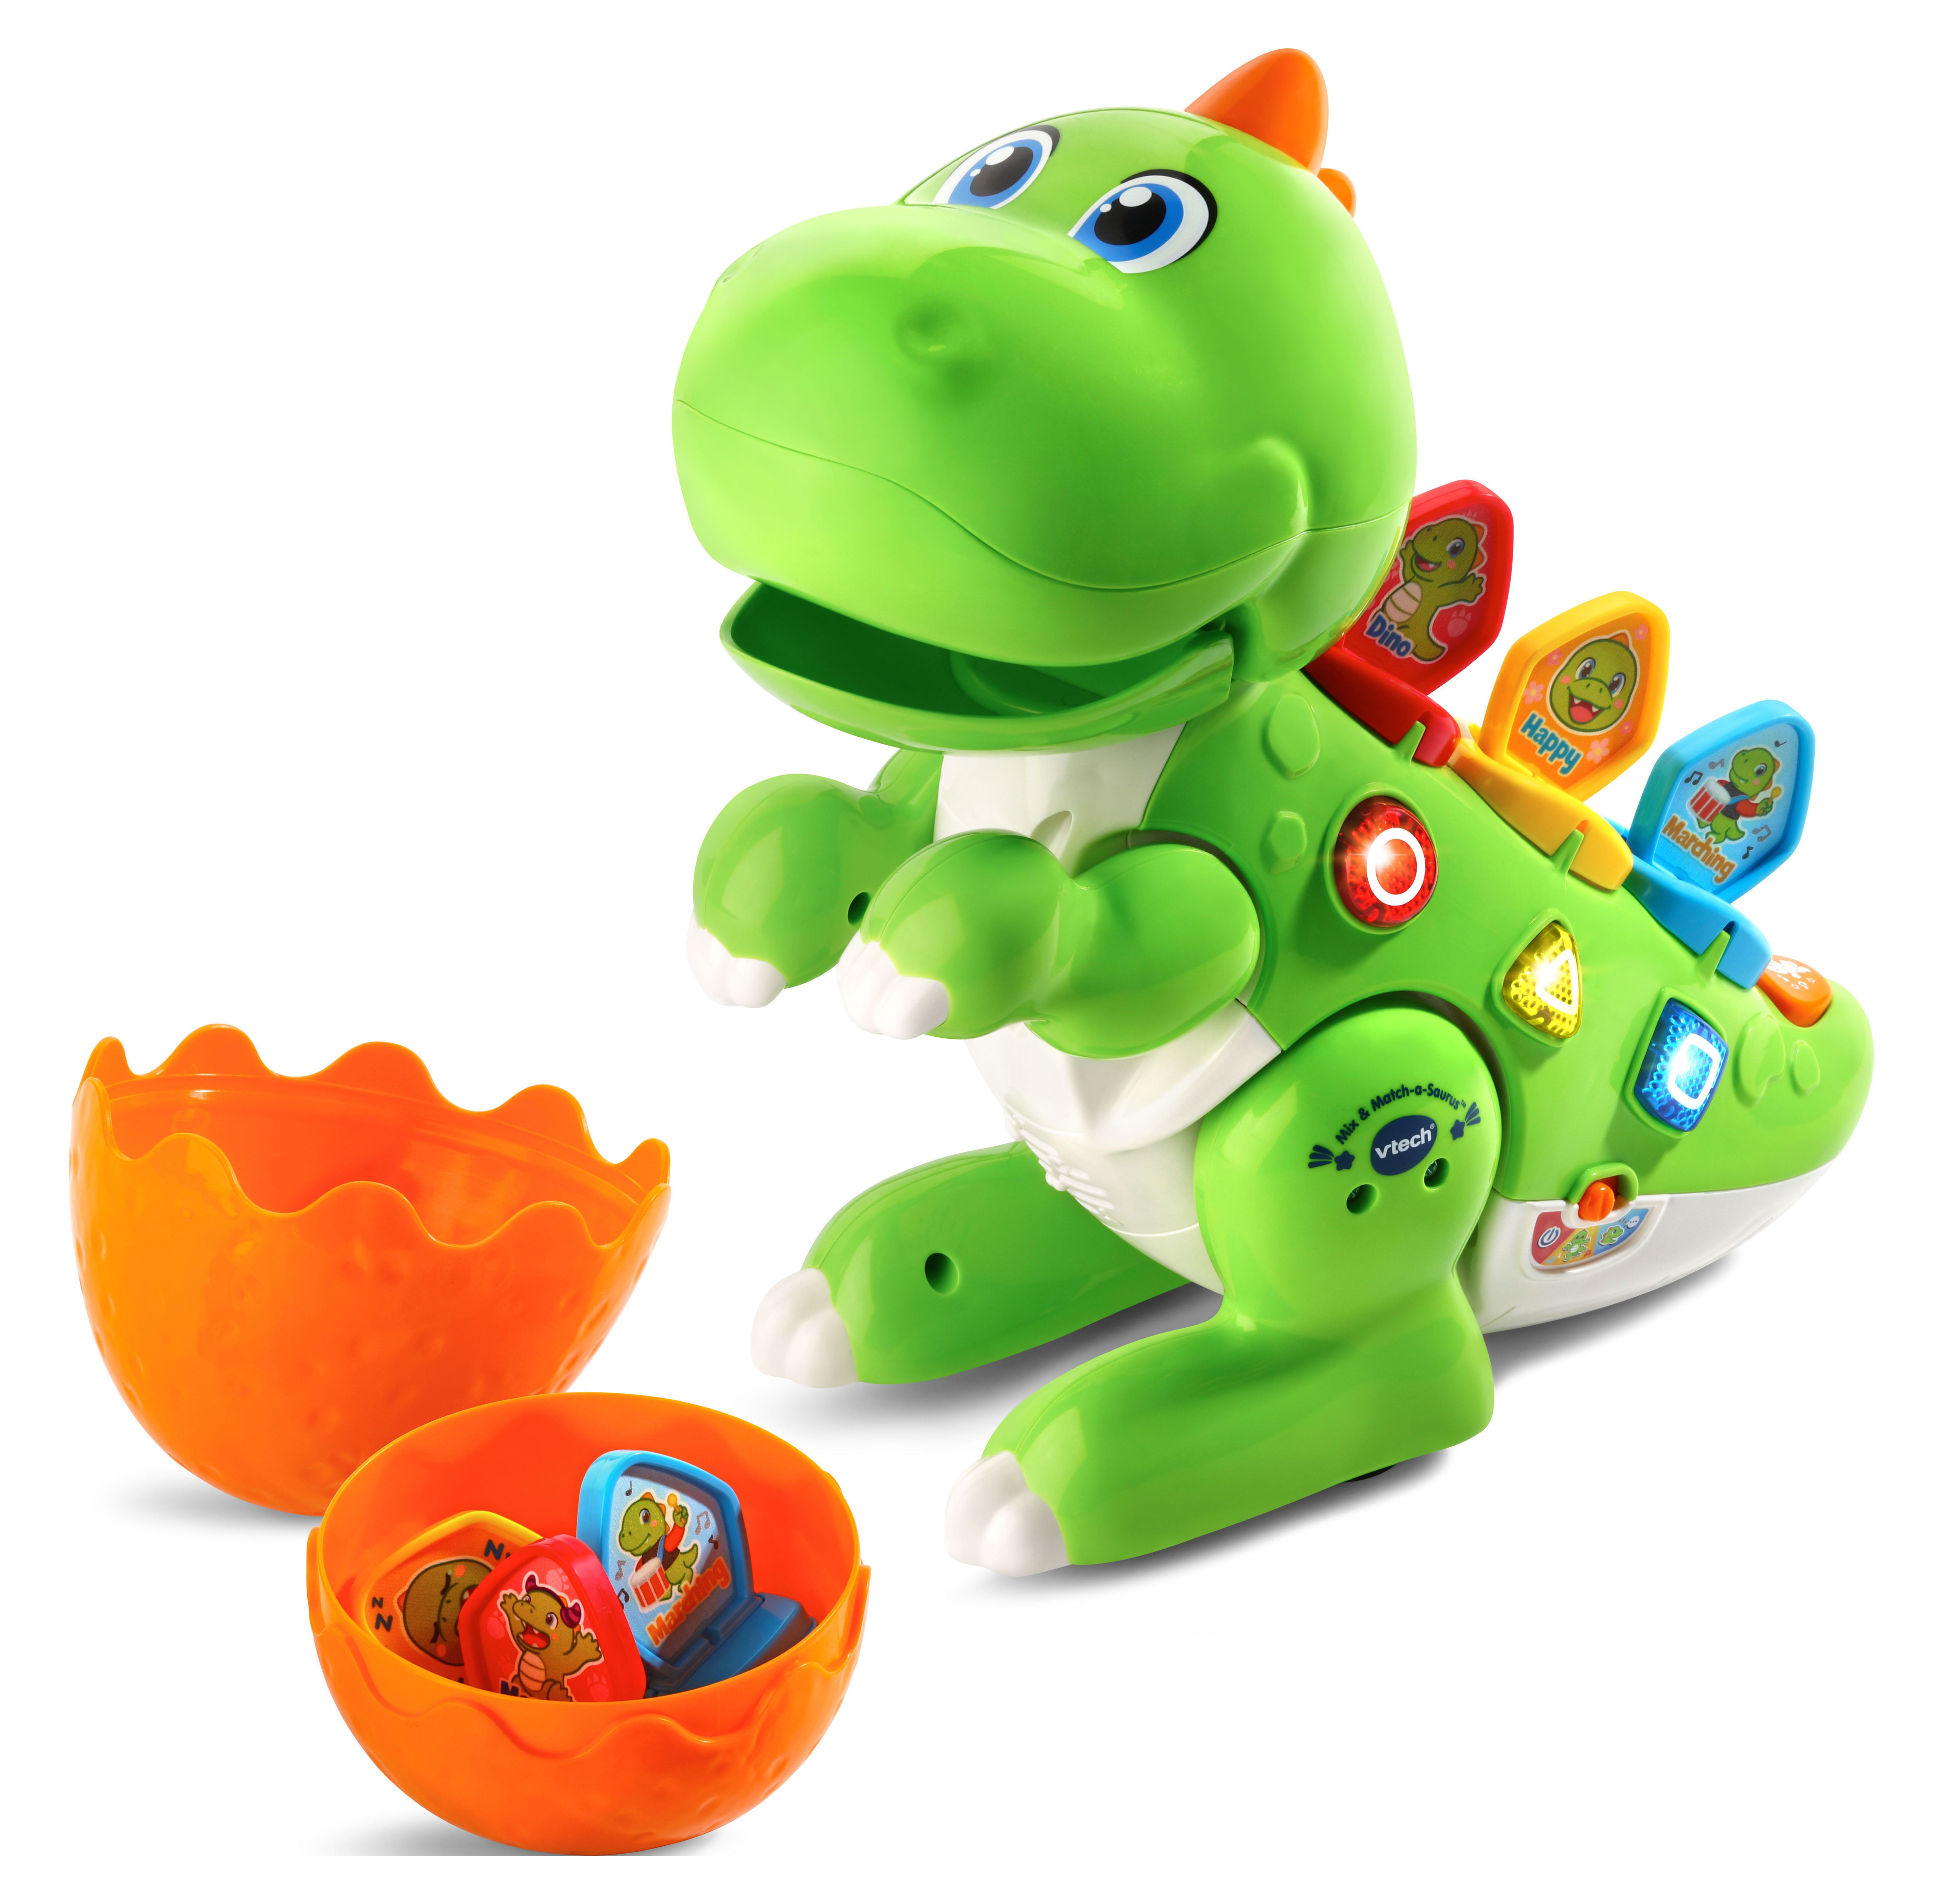 VTech Mix and Match-a-Saurus, Dinosaur Learning Toy for Kids, Green - image 5 of 10